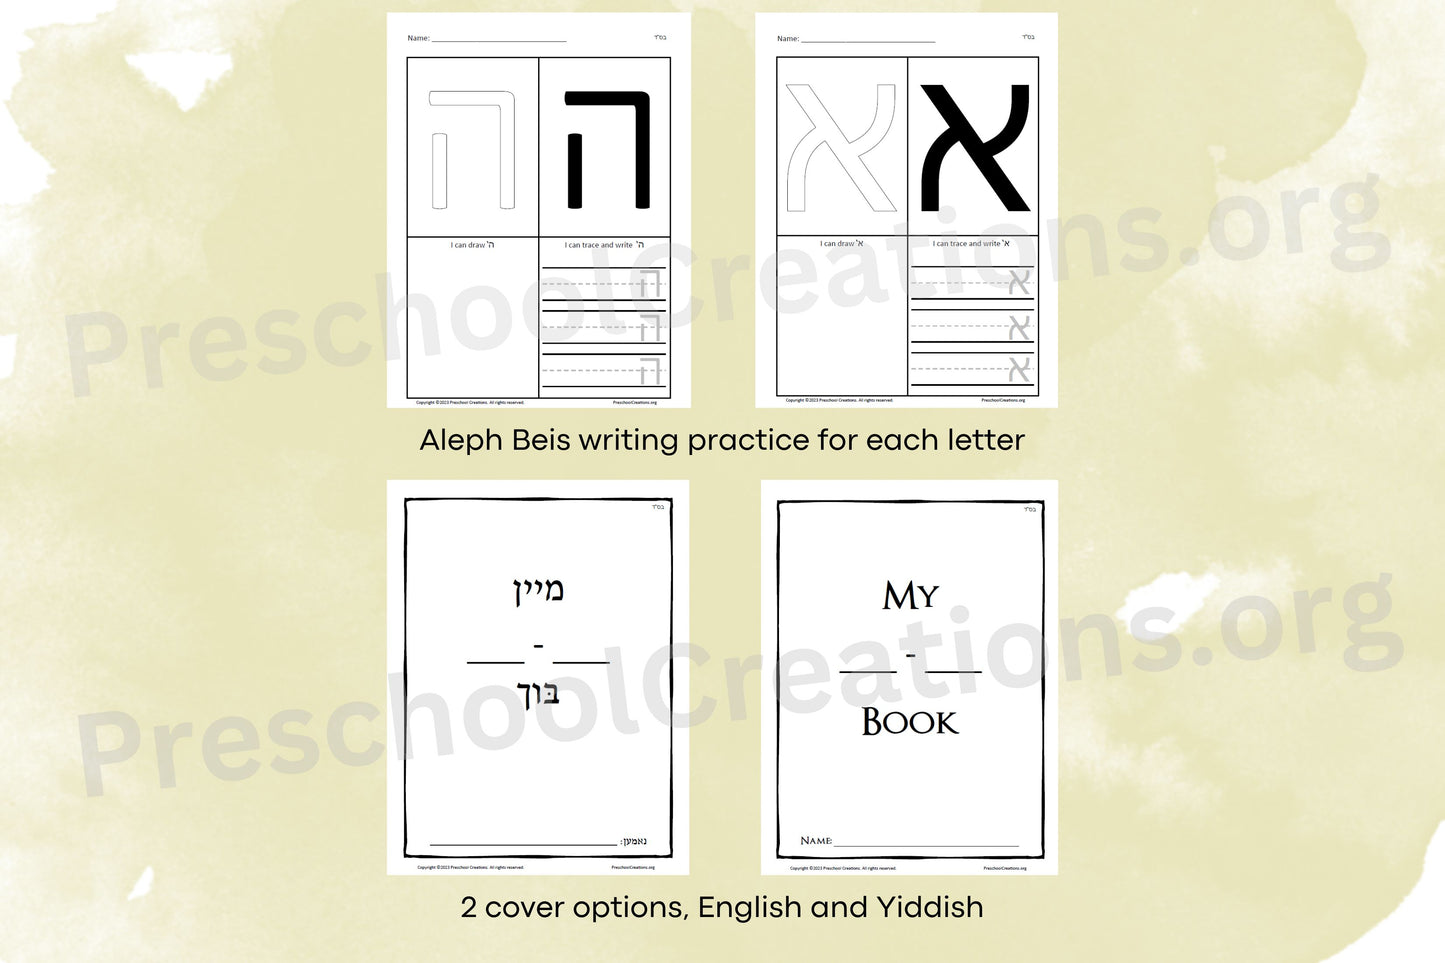 Letter-by-Letter Worksheets: Each letter includes has a dedicated worksheet for focused learning and enjoyment. The worksheet emphasizes writing skills, enabling children to form the letter with 3D objects, practice tracing, and develop their writing abilities. 1 page of instructions for use A cover in 2 languages, English and Yiddish, 1 focused writing worksheet for each letter Unlock Alef Bet Mastery with Our Aleph Beis Writing Workbook!